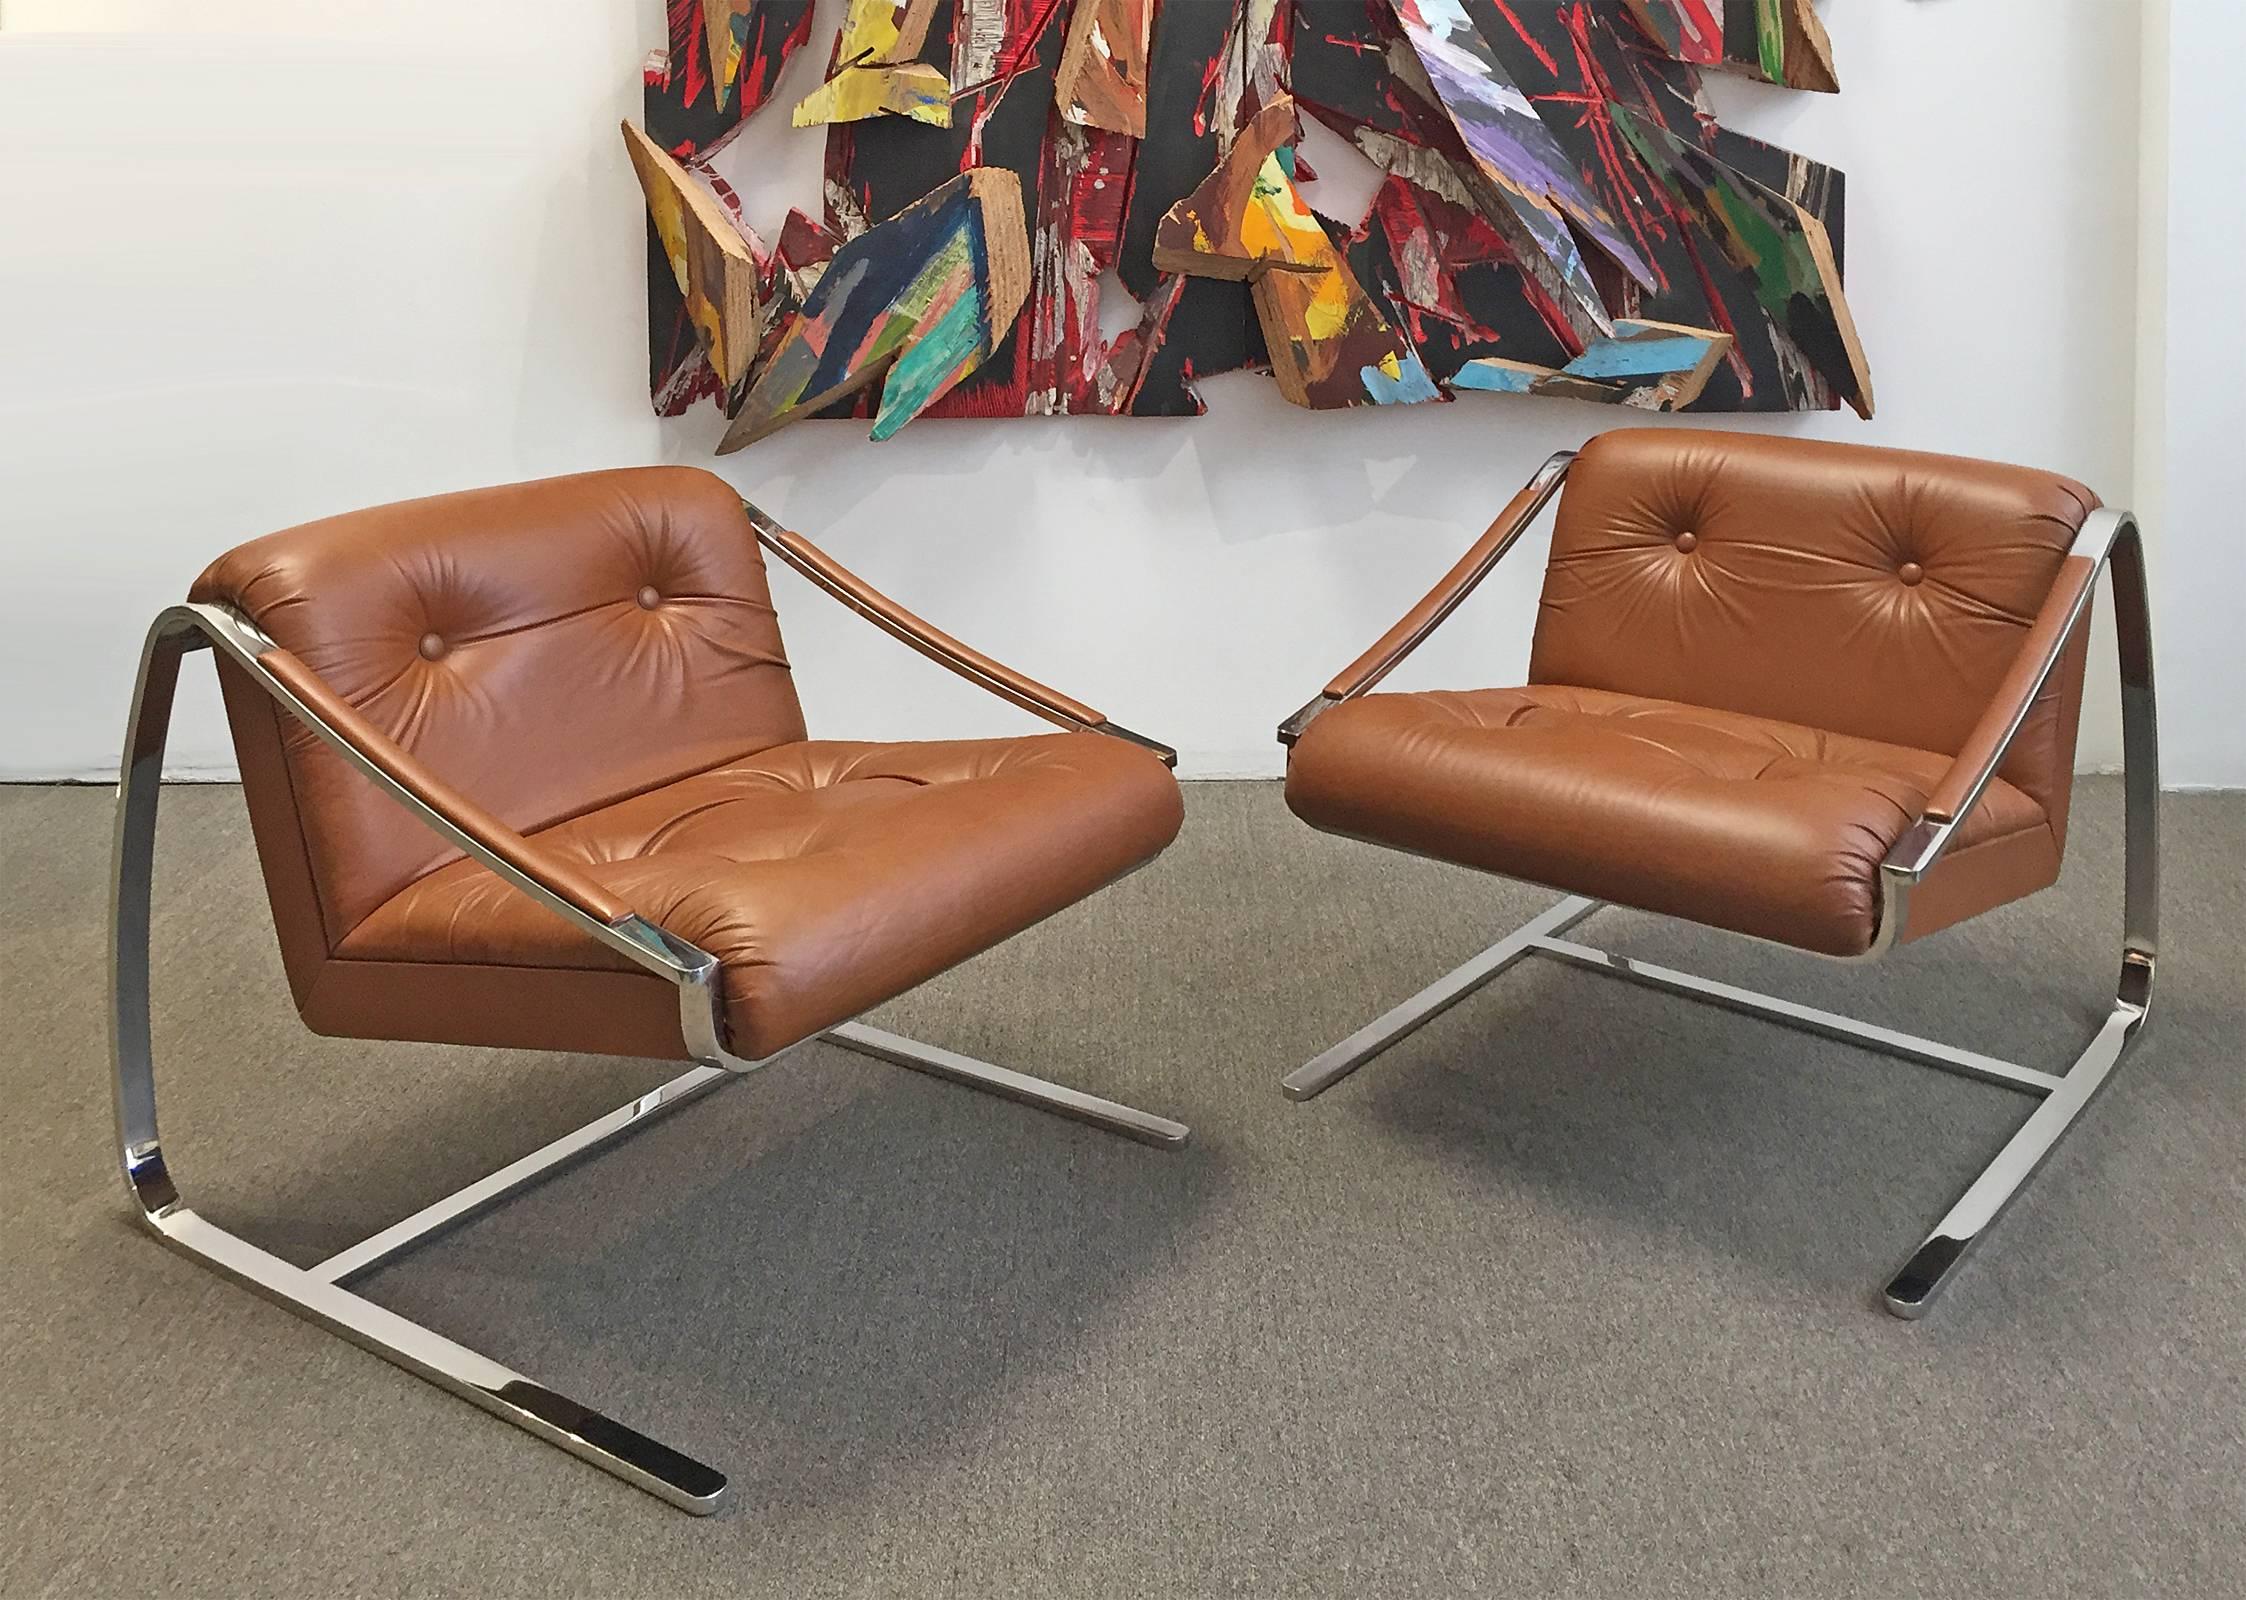 Exceptional pair of heavy polished steel and leather "Plaza" lounge chairs. Made by Brueton Furniture. Designed by Charles Gibilterra. Ultra modern style. Designed for comfort. Fresh and ready for use. Price is for the pair.